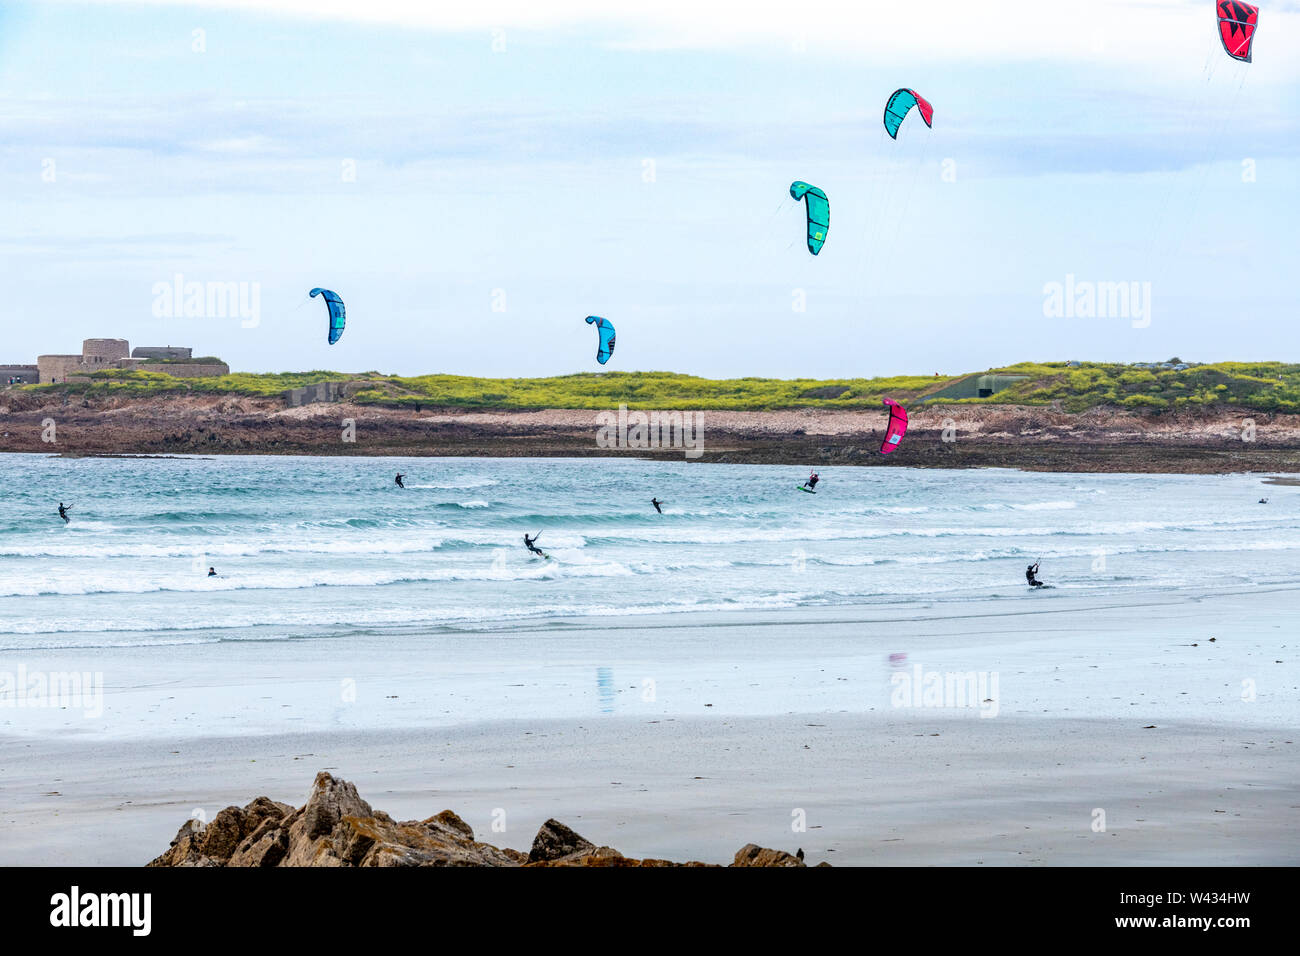 Kitesurf a Vazon Bay, Guernsey, Isole del Canale della Manica UK - Fort Hommet è in background Foto Stock